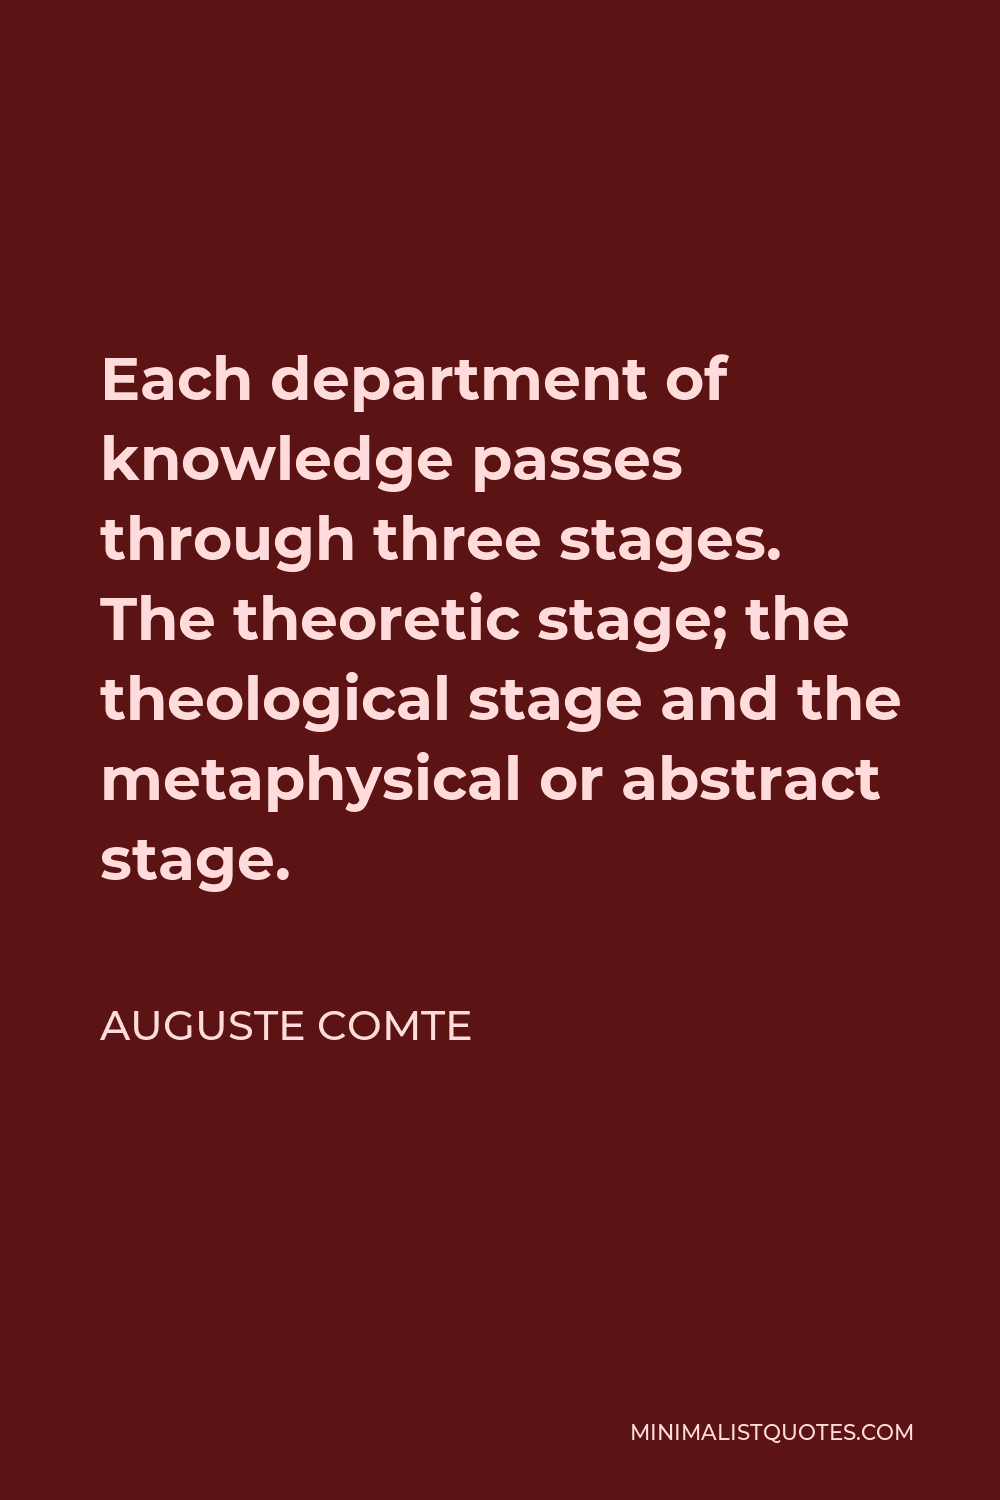 Auguste Comte Quote - Each department of knowledge passes through three stages. The theoretic stage; the theological stage and the metaphysical or abstract stage.